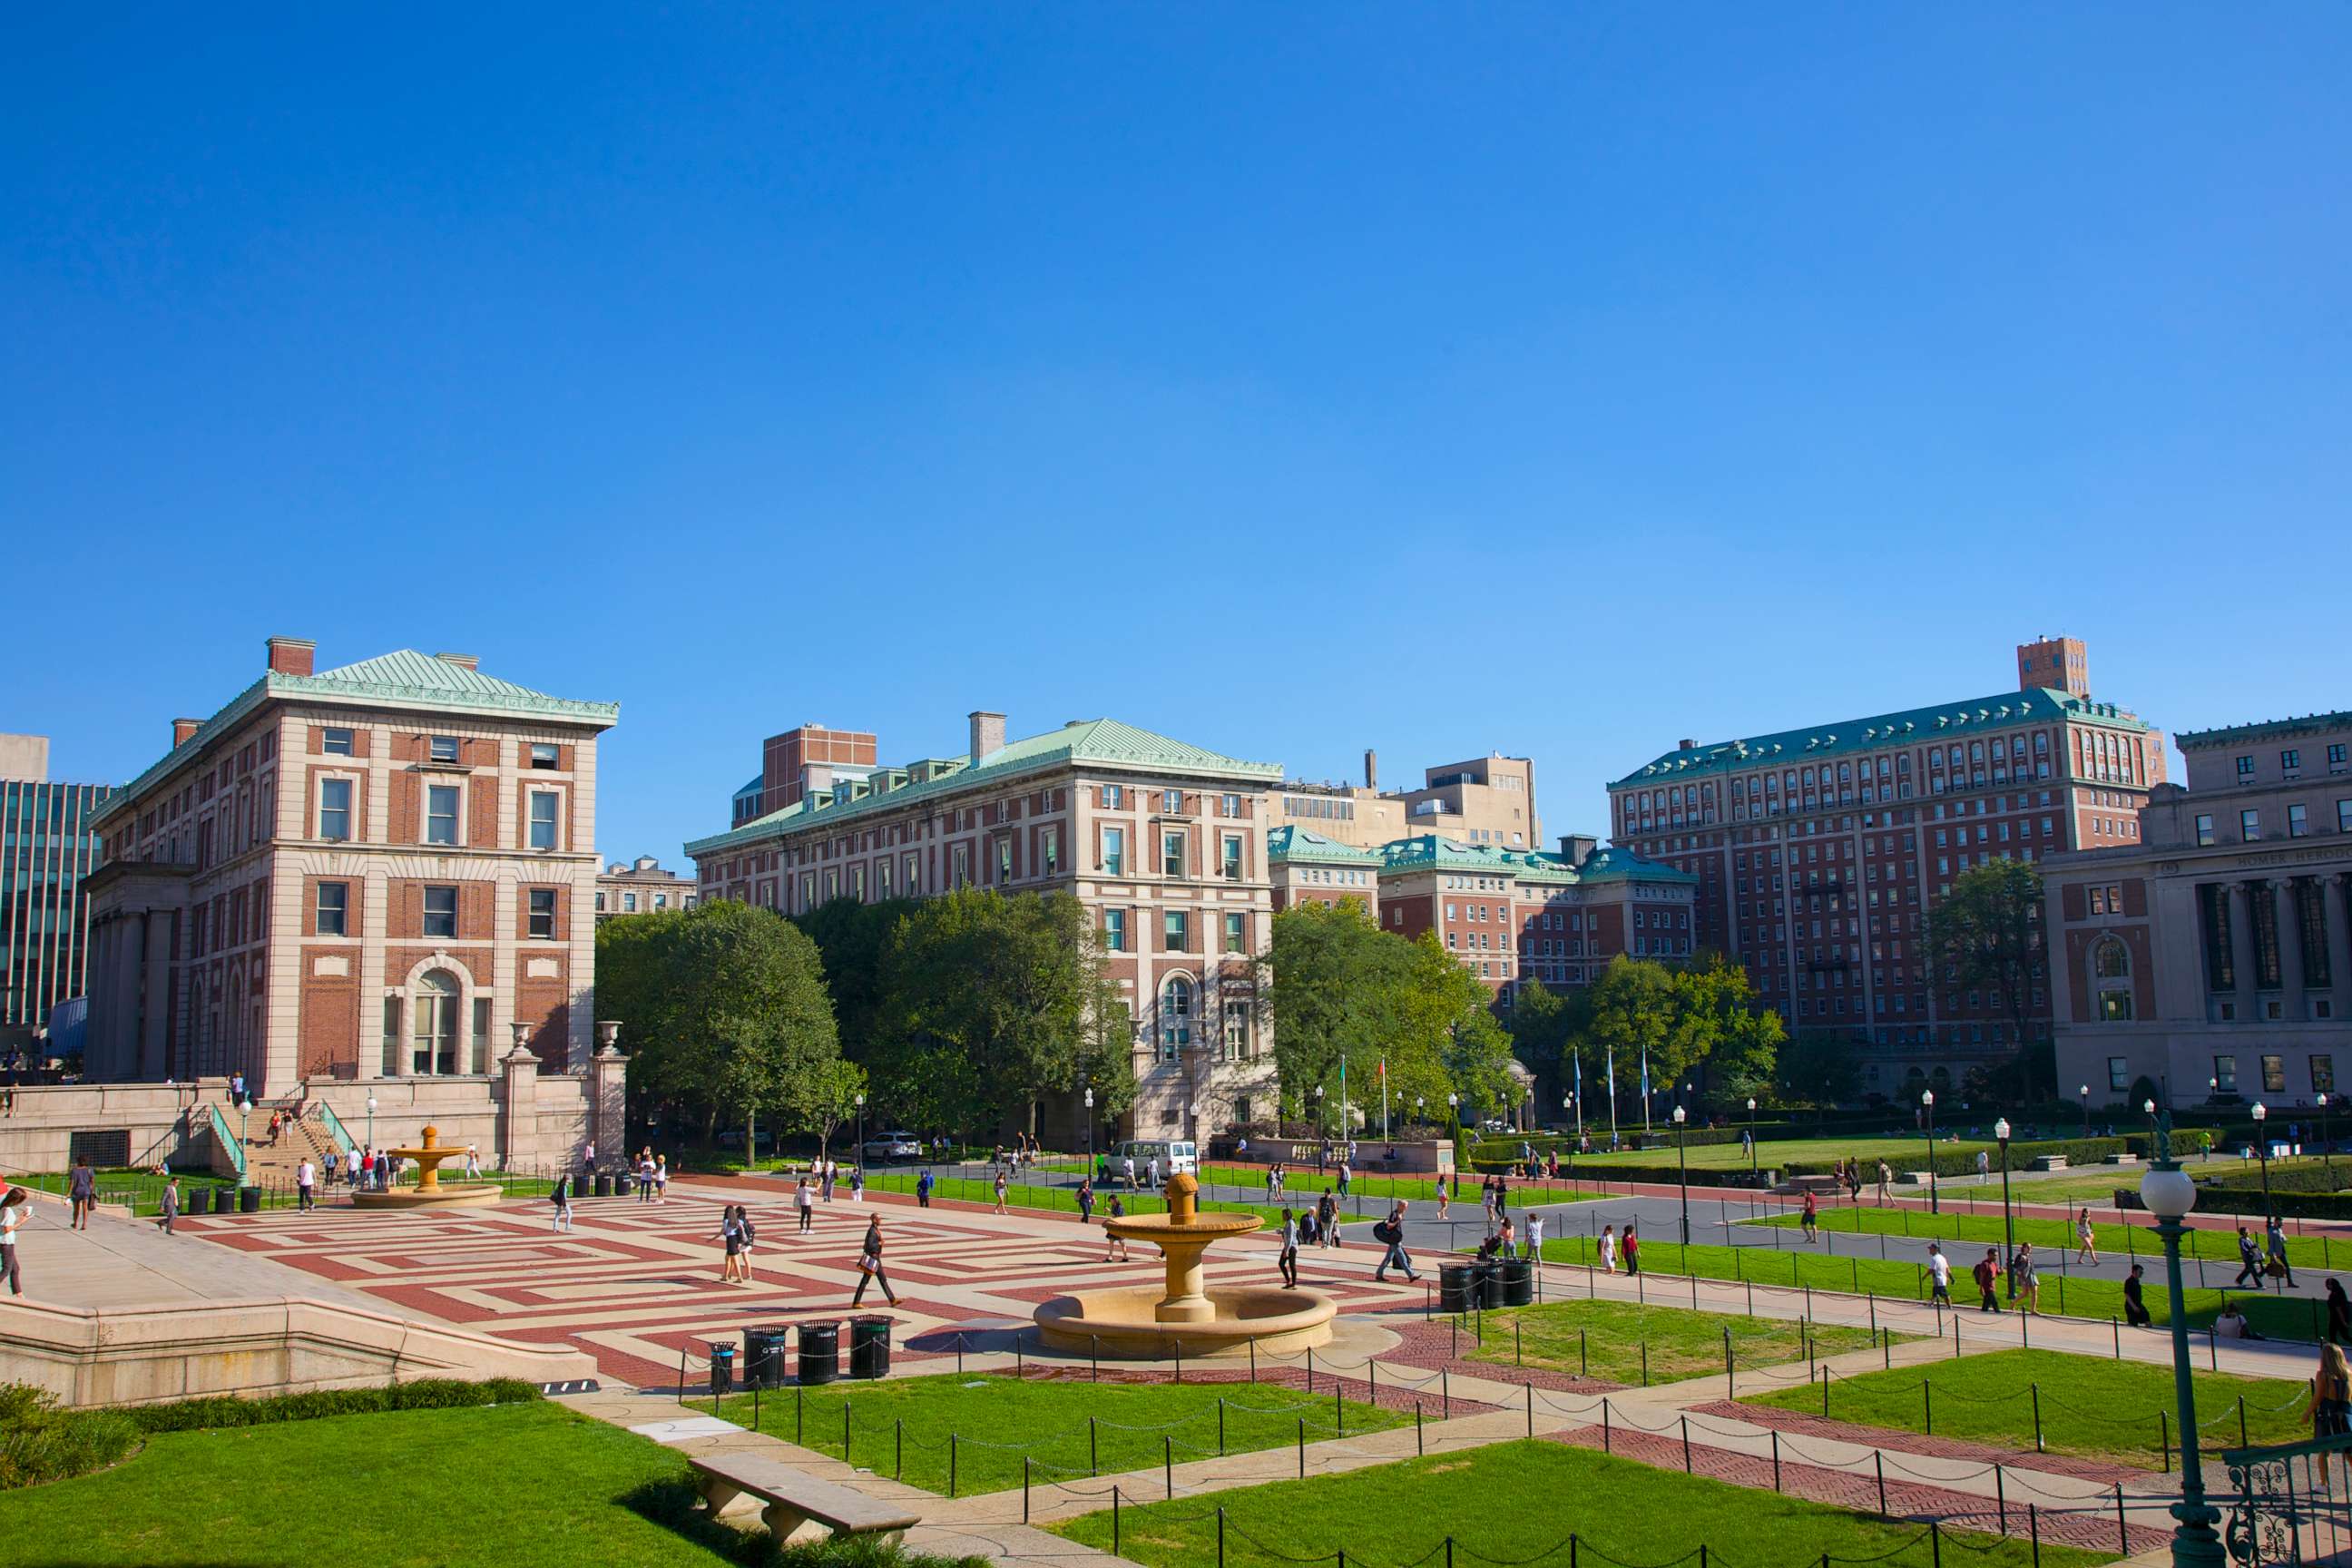 PHOTO: Plaza and lawns looking southeast from near Low Memorial Hall, Columbia University, towards Kent and Hamilton, Upper West Side, New York.